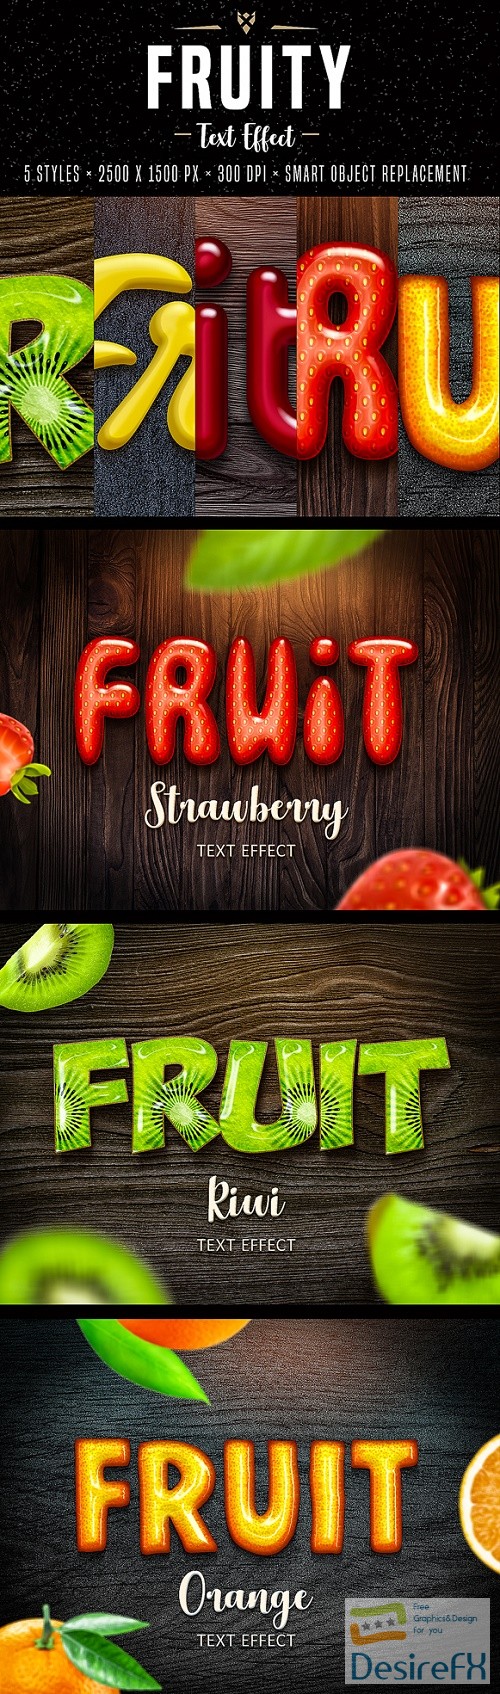 Fruit Text Effects for Photoshop 22177922